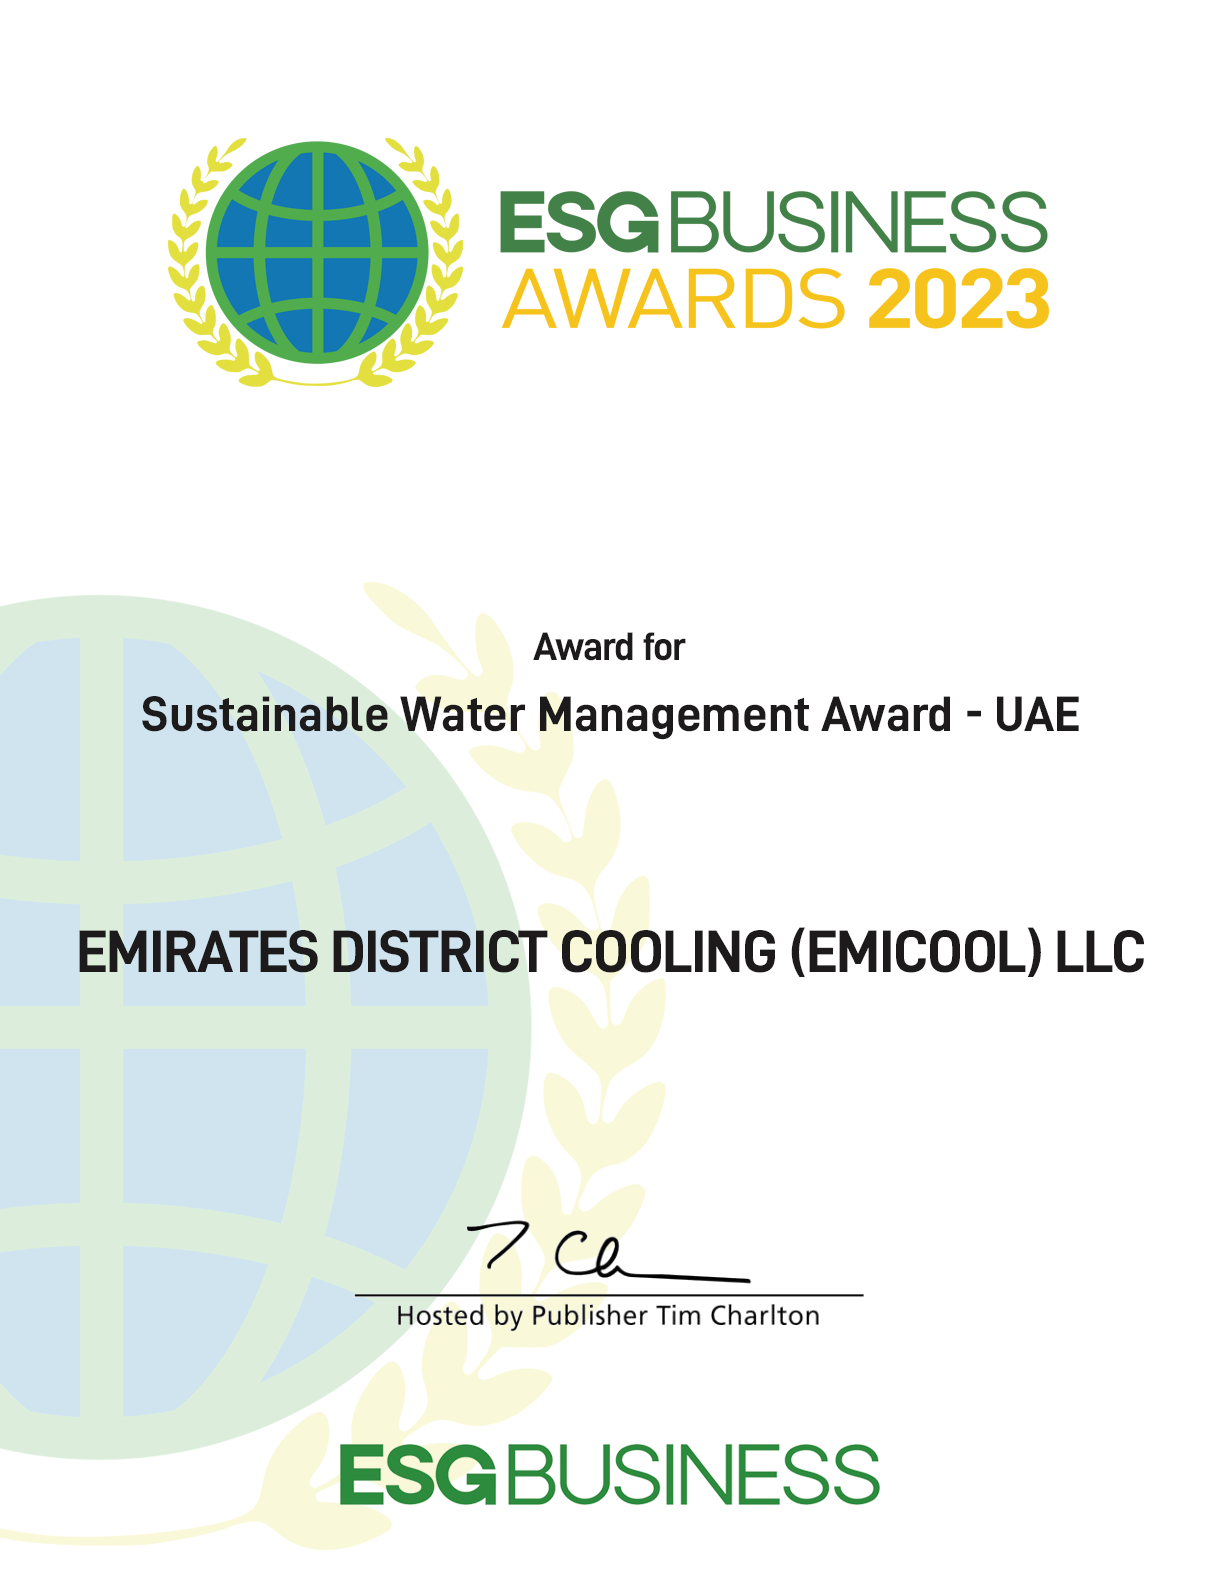 ESG Business Awards 2023 for Sustainable Water Management